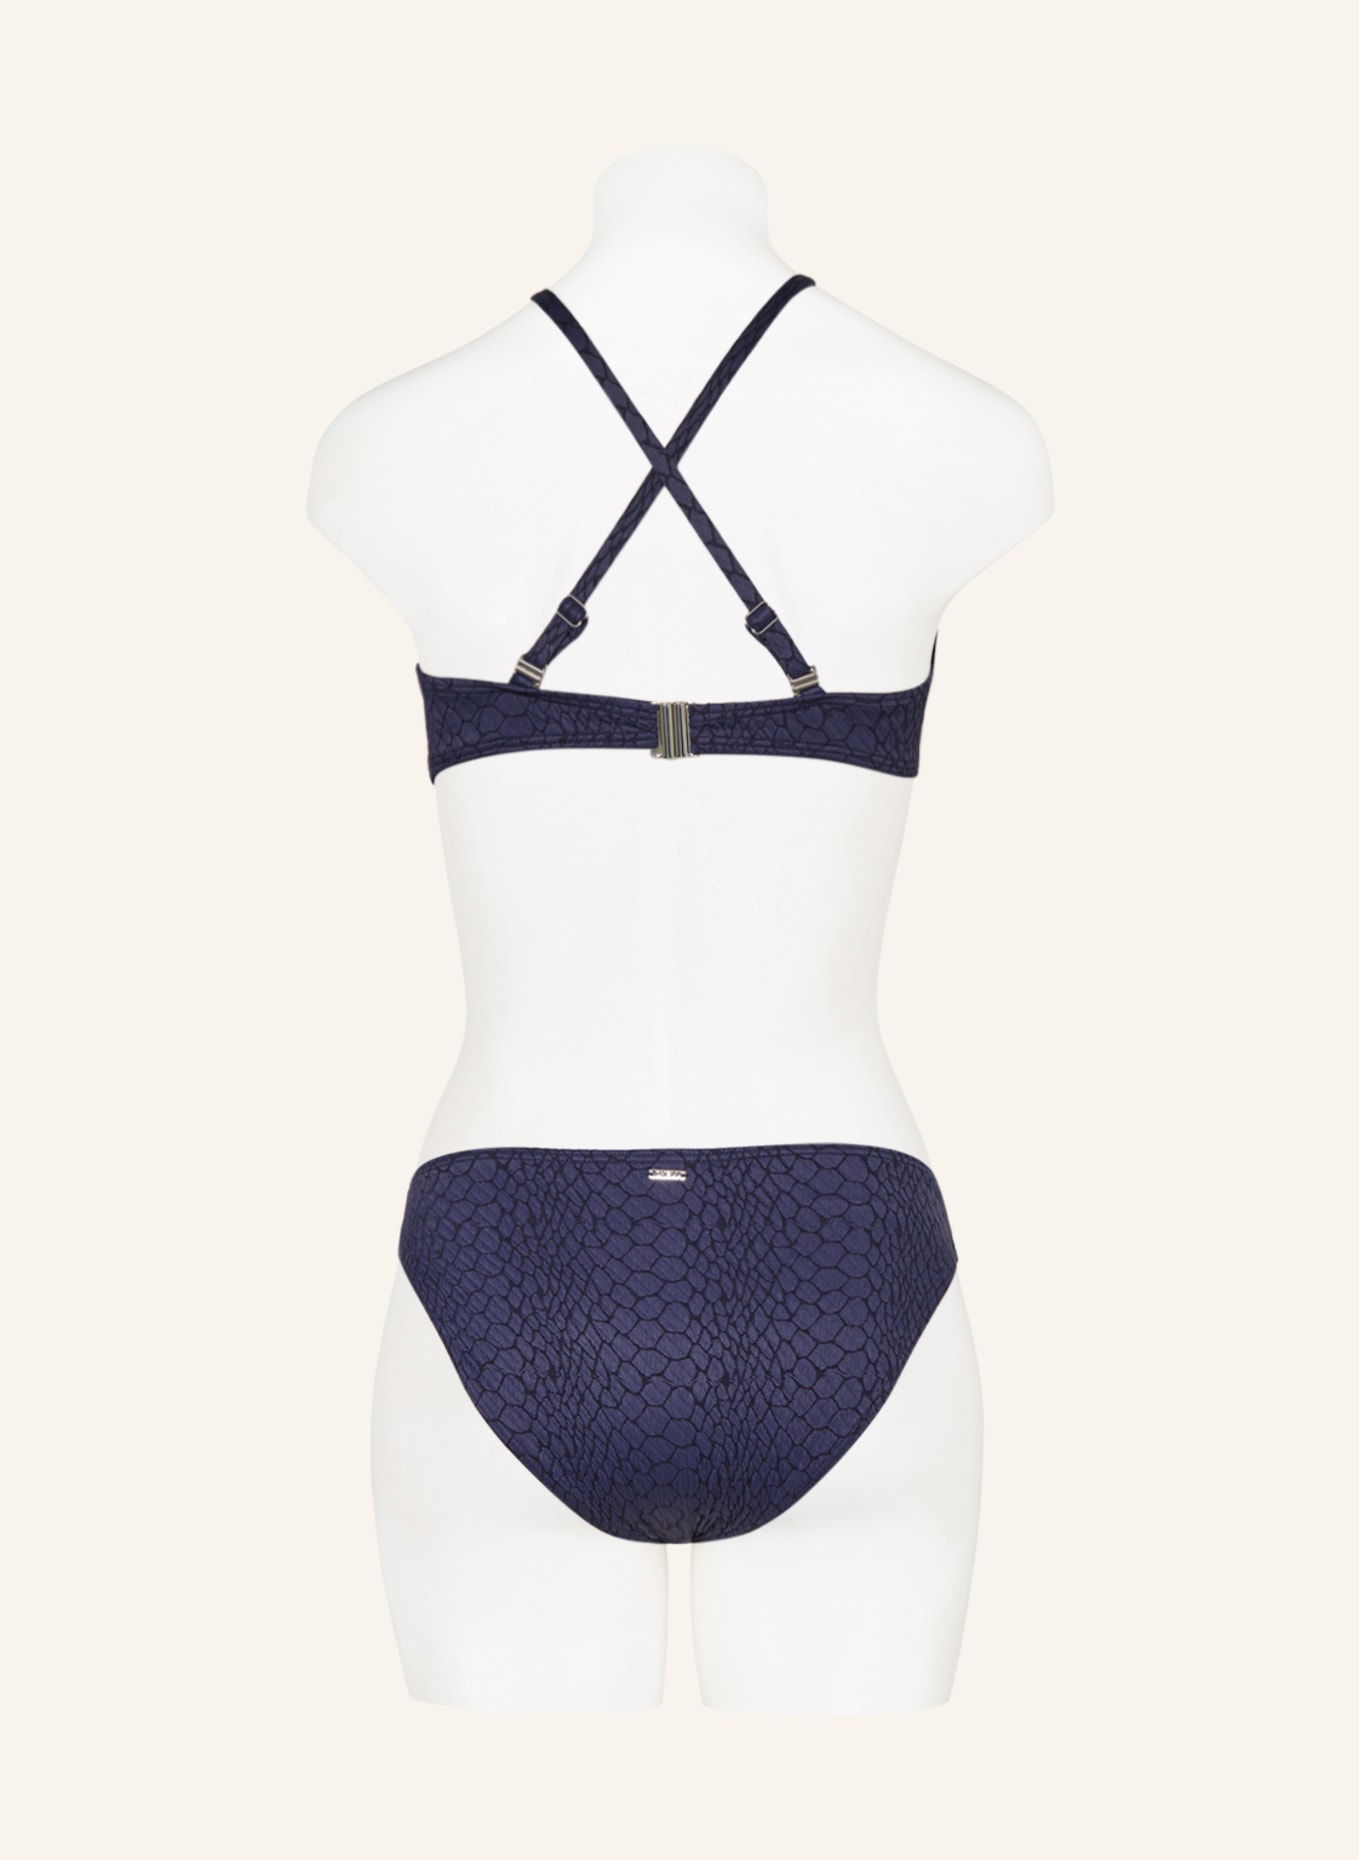 CYELL Underwired bikini top SOLID SNAKE, Color: DARK BLUE (Image 6)